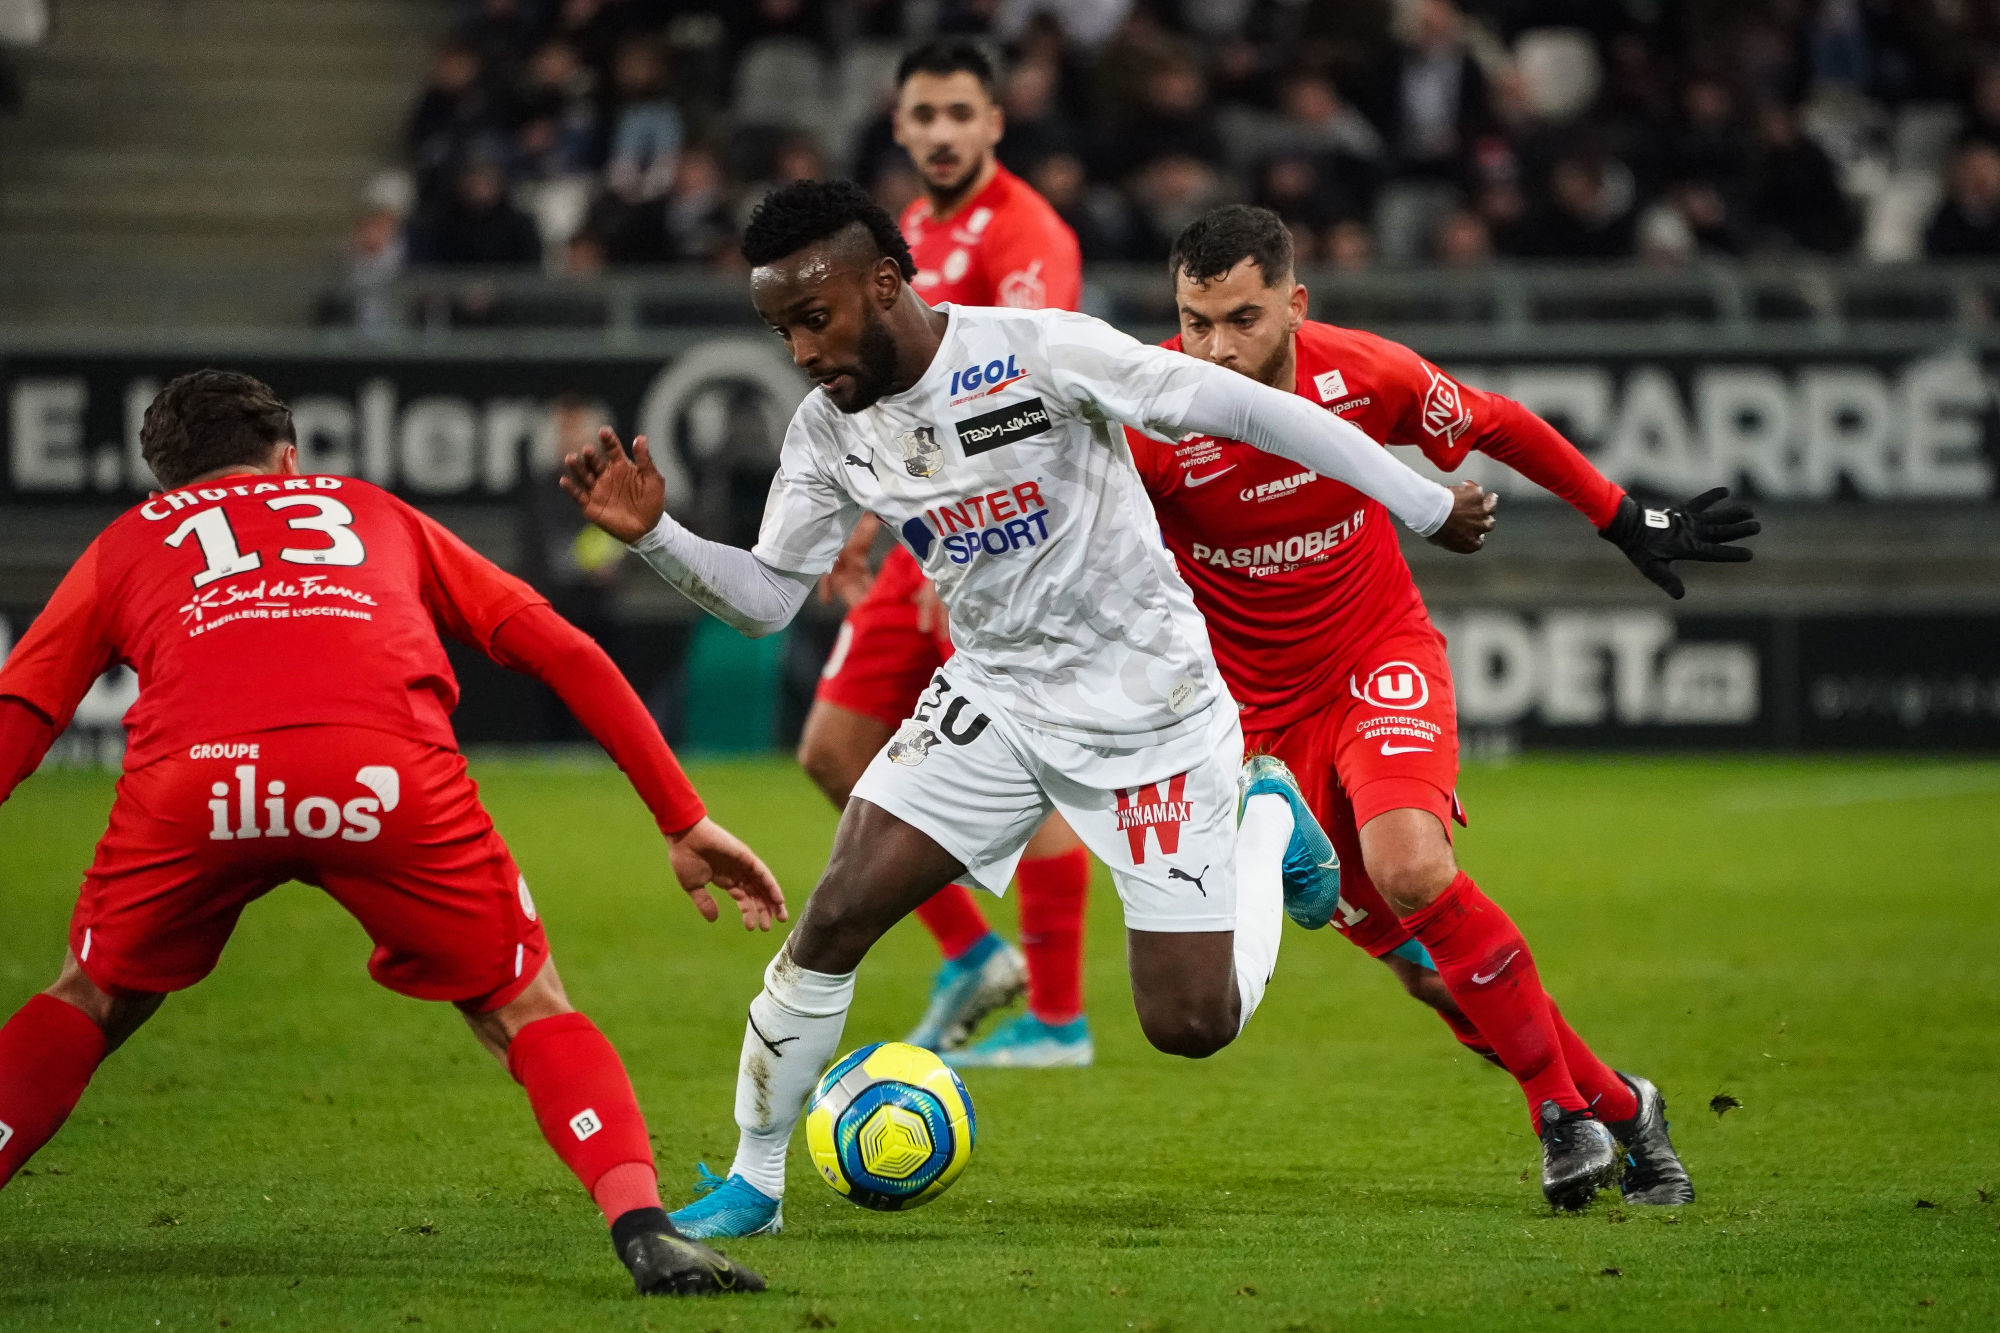 Steven MENDOZA of Amiens SC during the Ligue 1 match between Amiens SC and Montpellier HSC at Stade Crédit Agricole La Licorne on January 11, 2020 in Amiens, France. (Photo by Pierre Costabadie/Icon Sport) - Stade de la Licorne - Amiens (France)